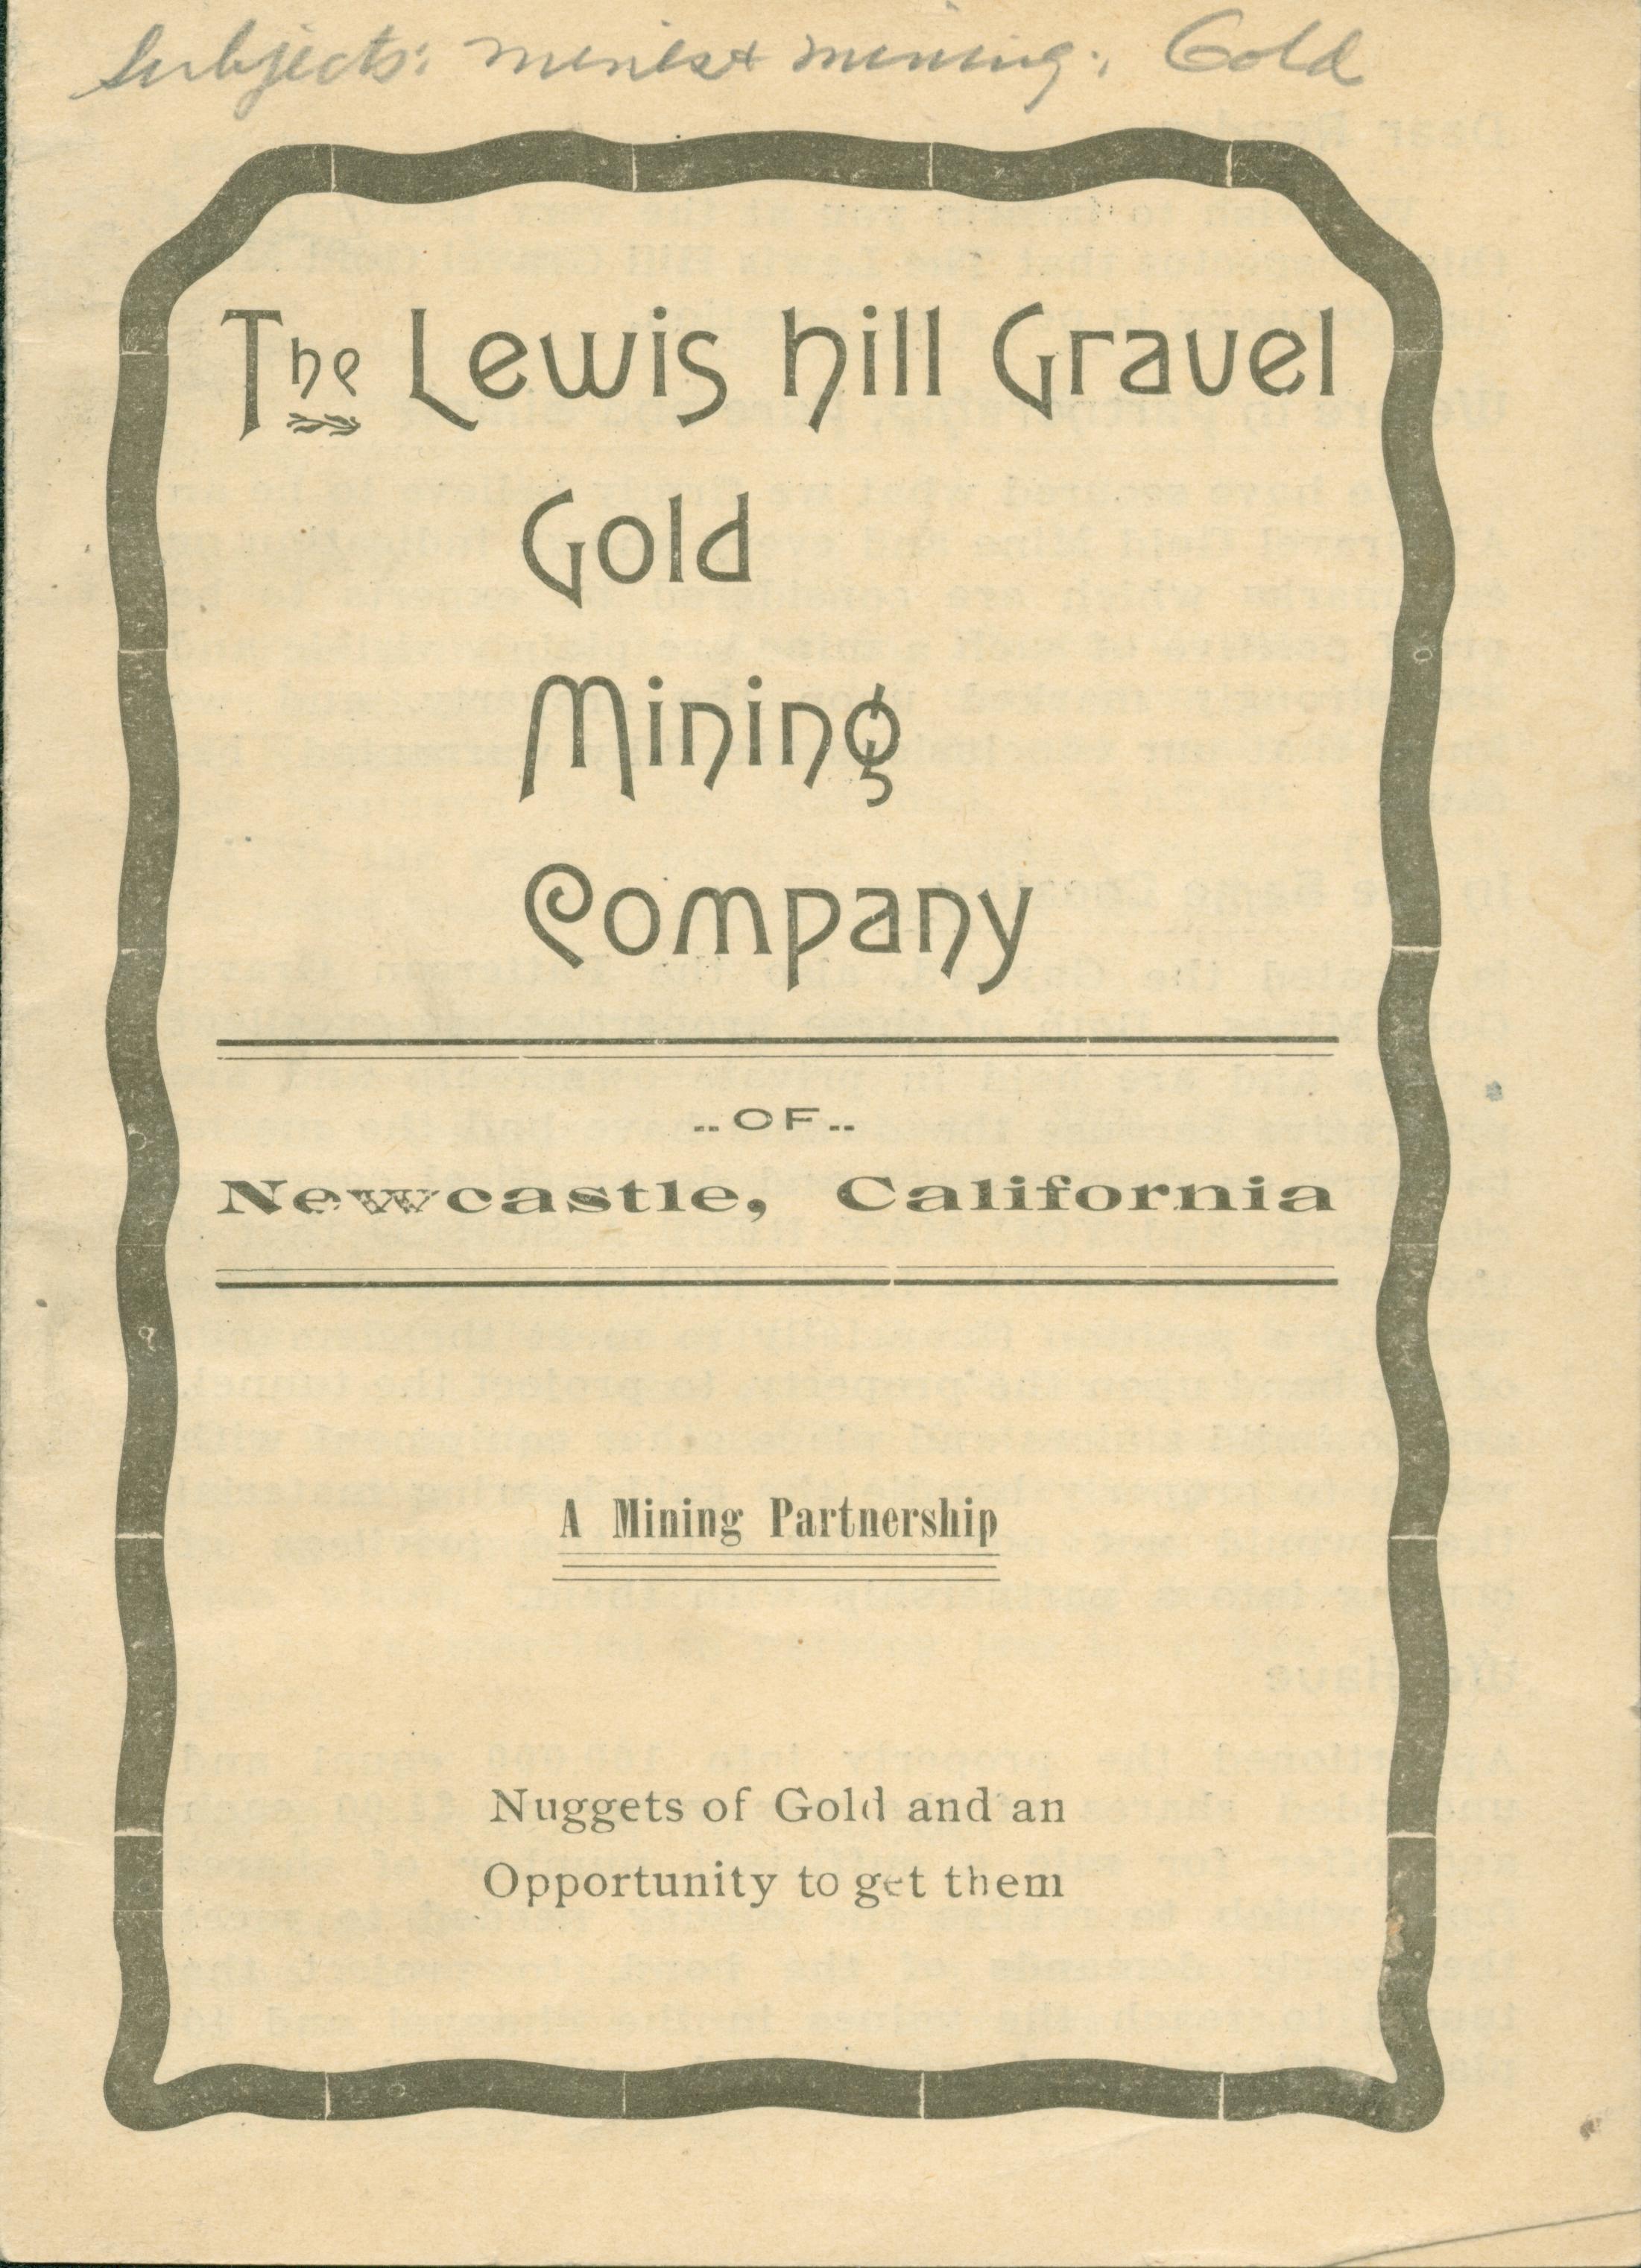 The front cover shows the title of the mine, surrounded by a border